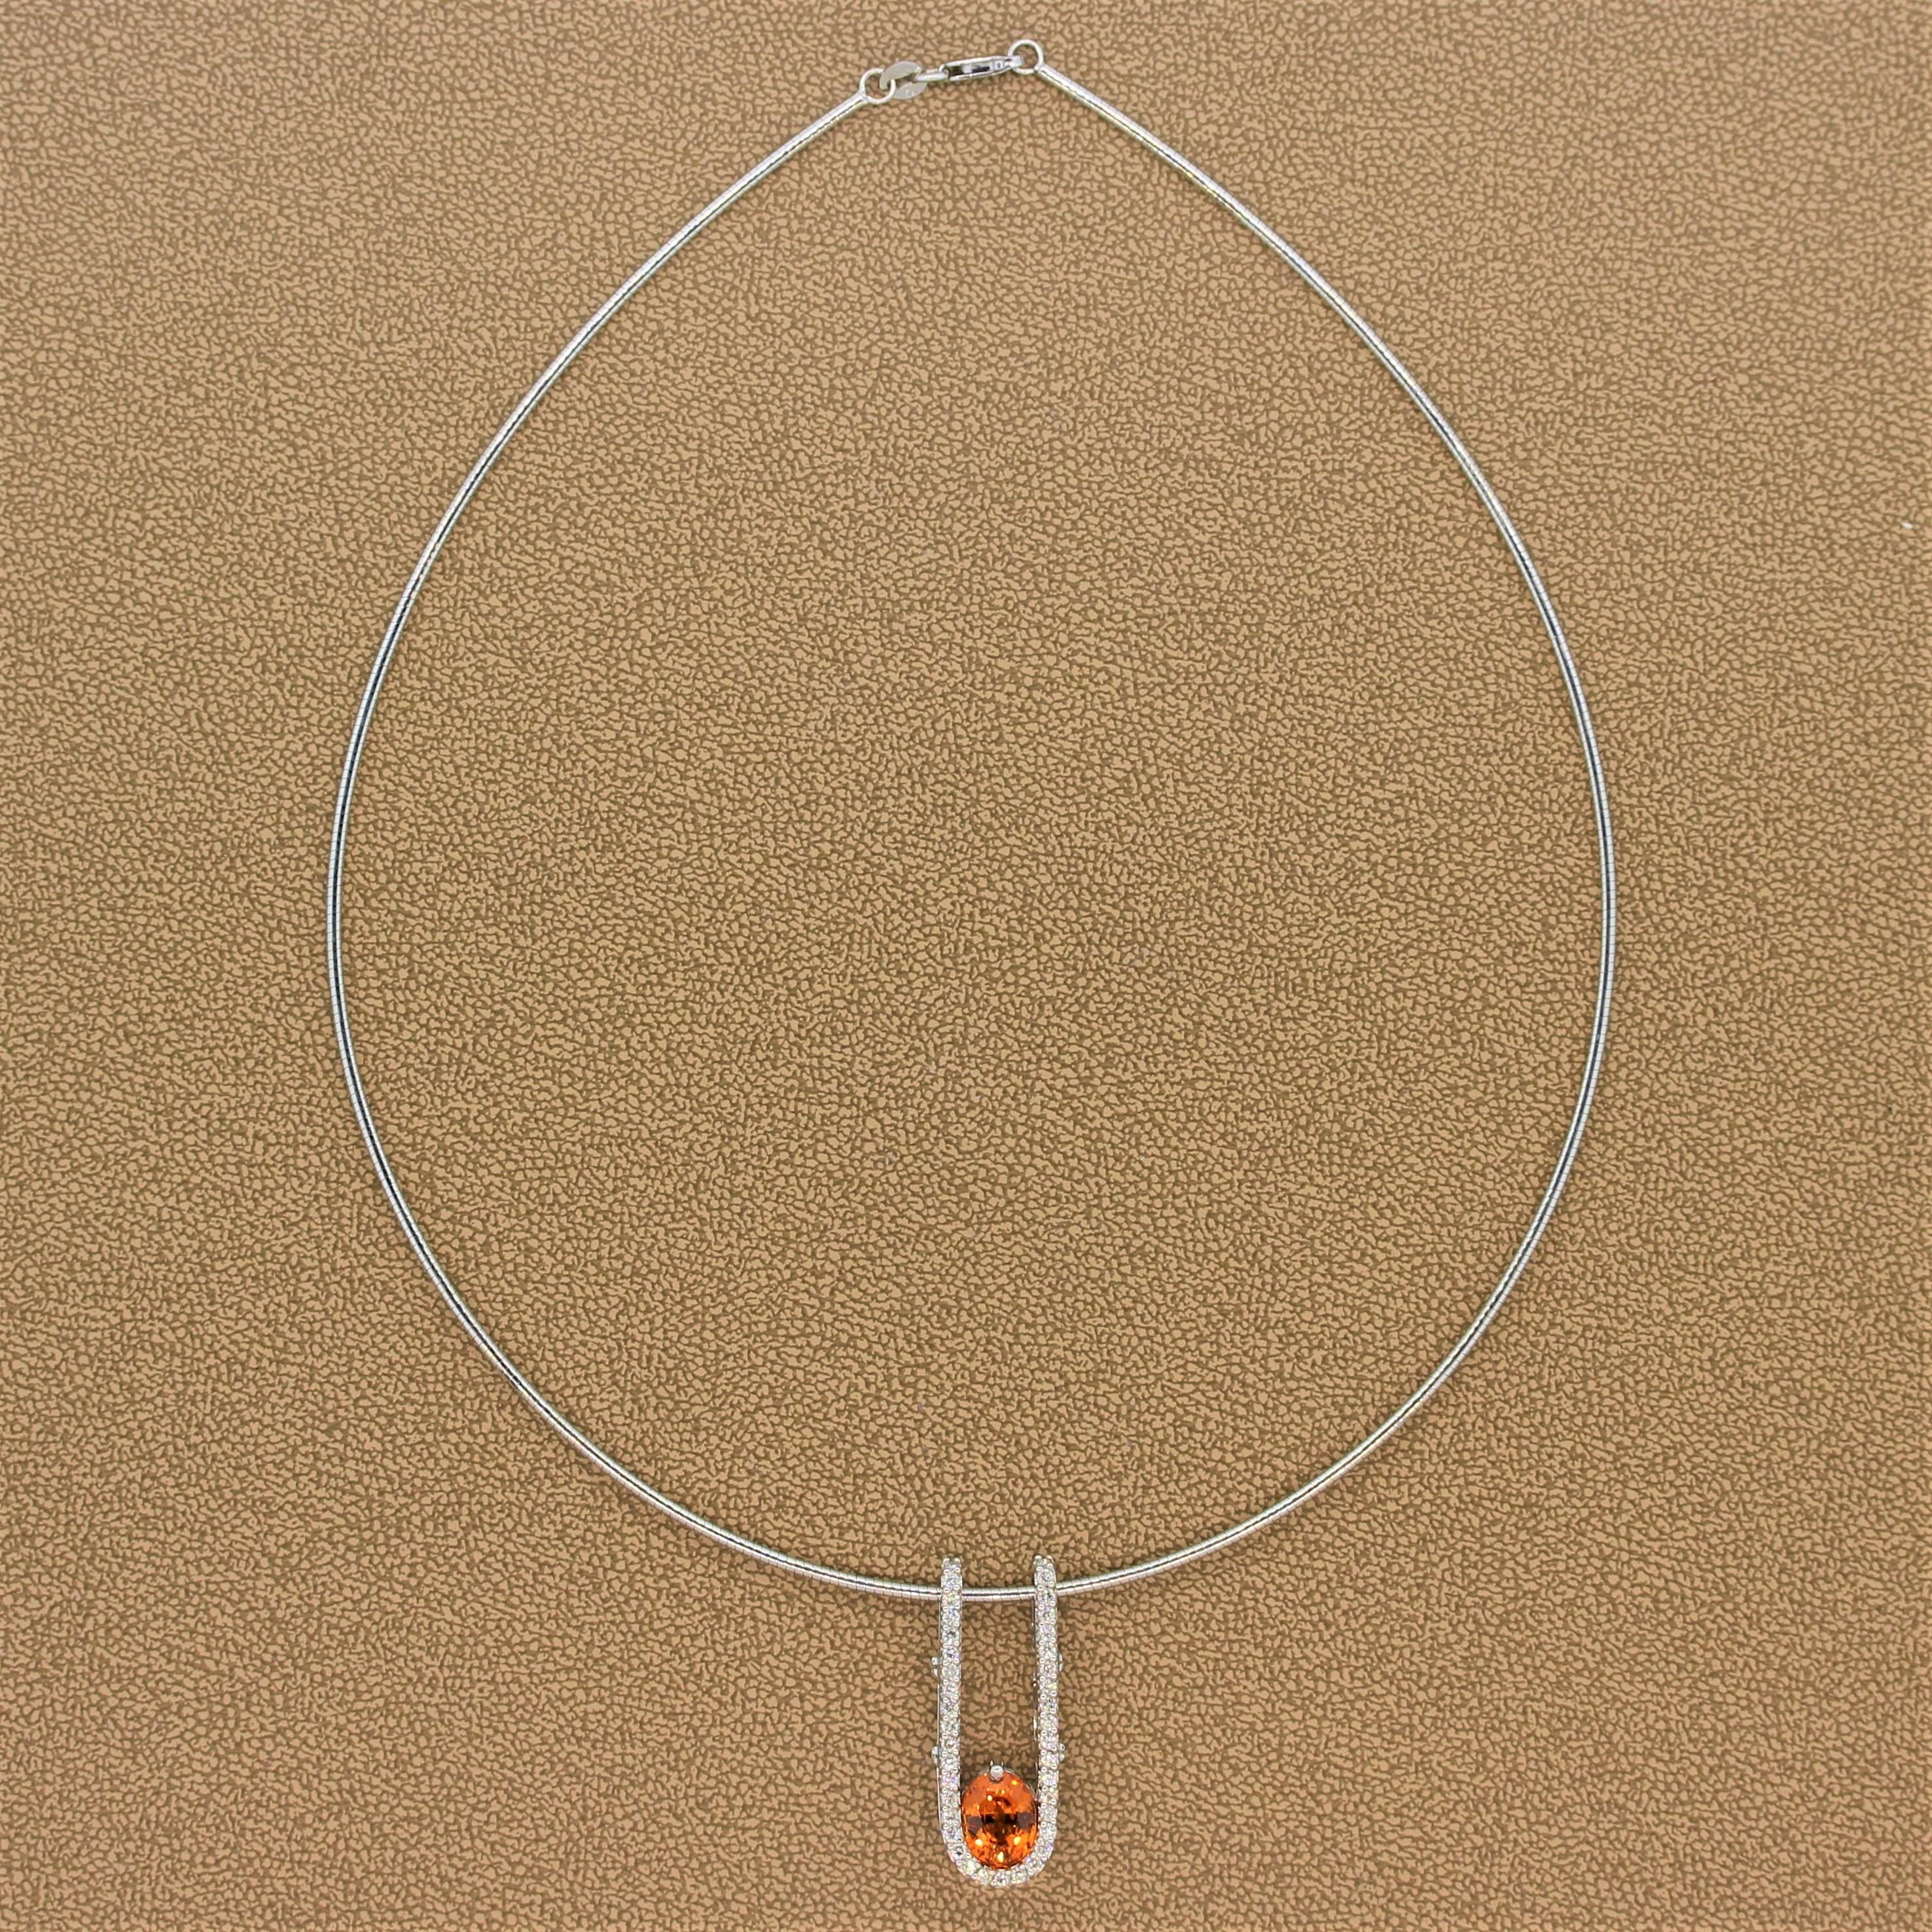 A modern slide pendant featuring a gem 2.77 carat mandarin garnet. The oval shaped gemstone has a vivid orange color with amazing life and brilliance. It sits at the bottom of a 14K white gold setting being cradled by 0.71 carats of colorless round